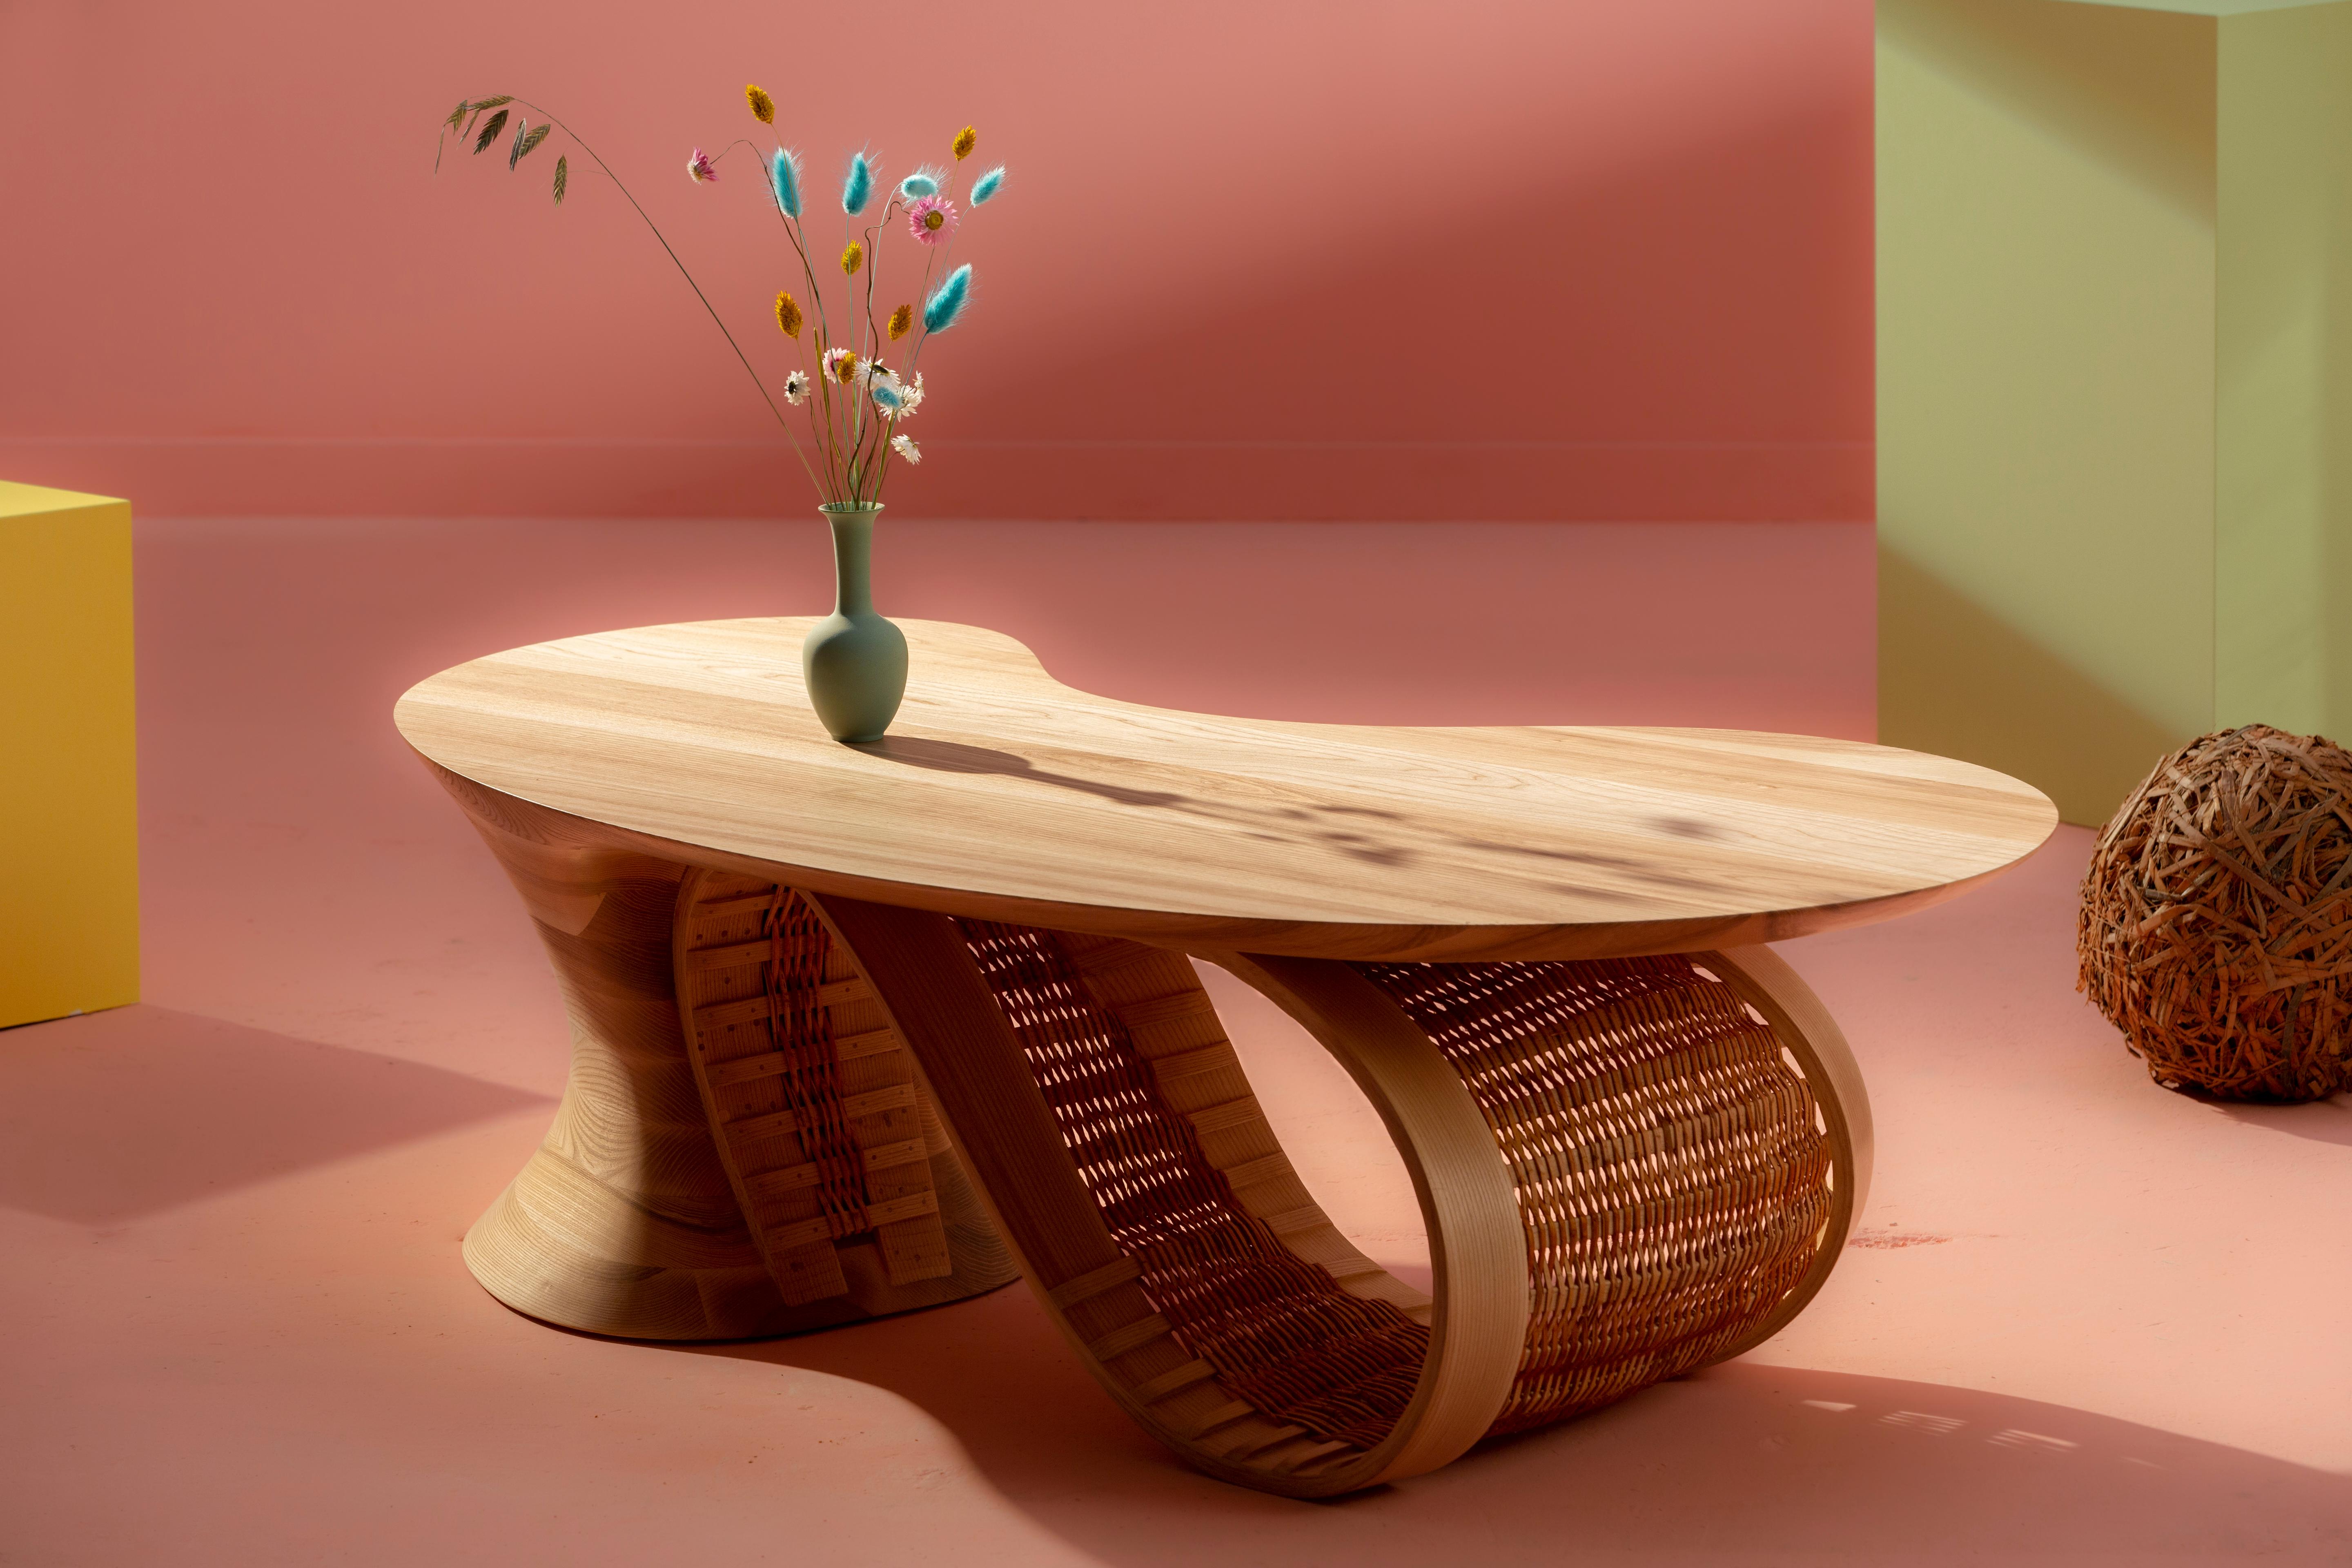 Dylan Moore Studio's Gather Table is a stunning example of the studio's commitment to creating functional furniture that is as much a work of art as it is a practical piece. The Gather Table is an intricately crafted piece of furniture that